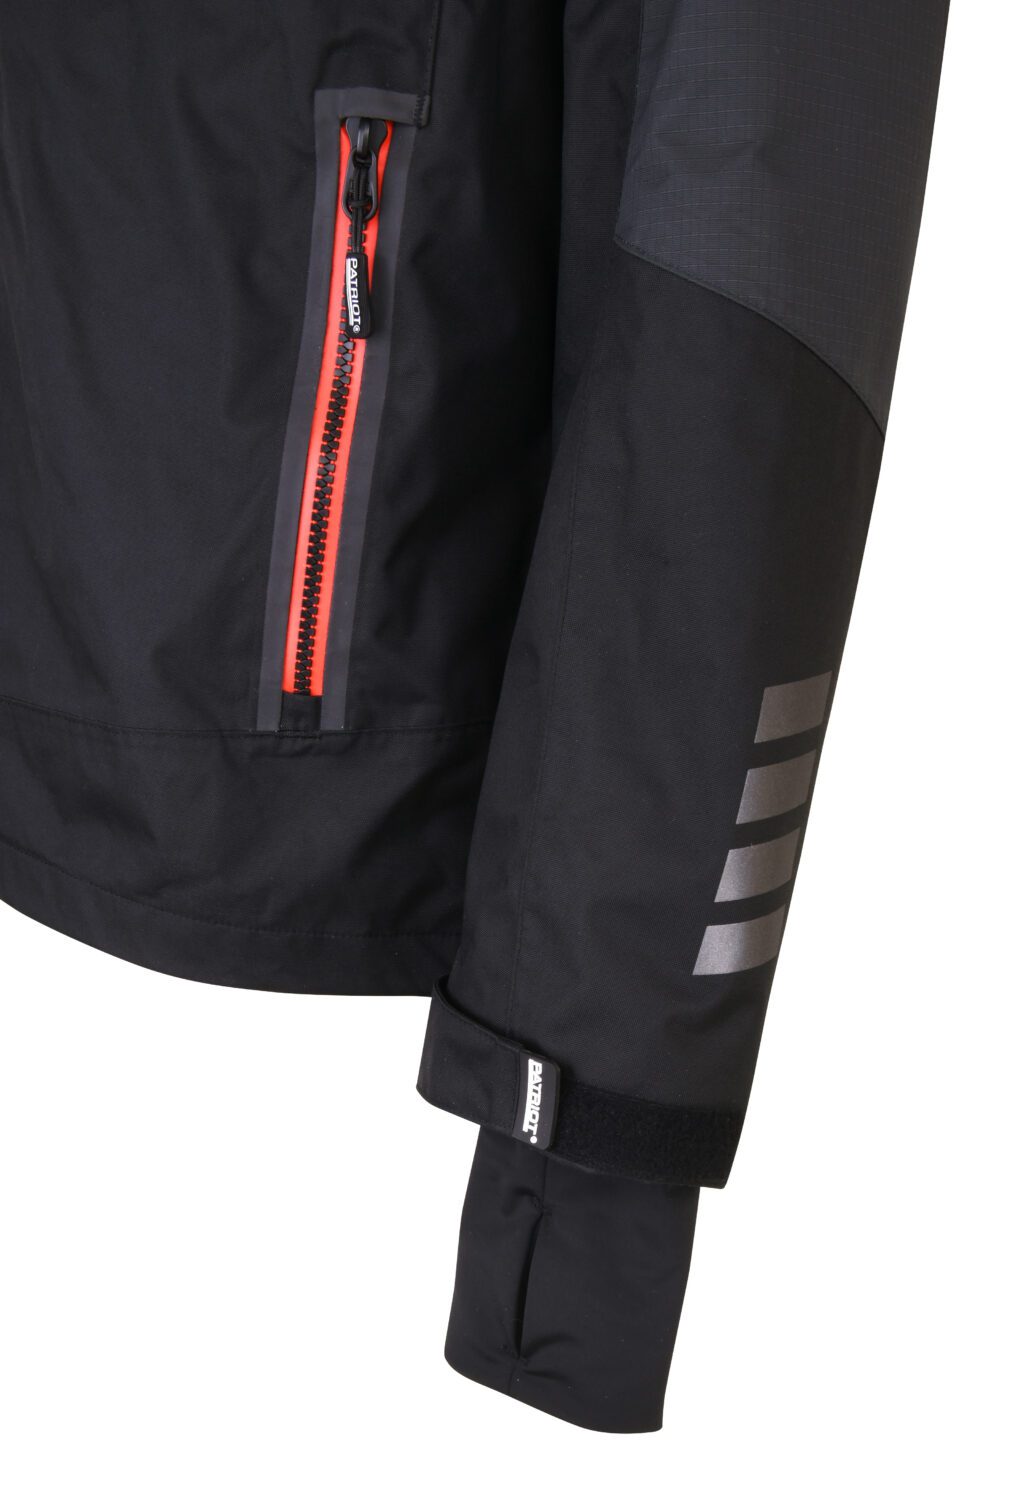 Giacca Patriot Dry Guard